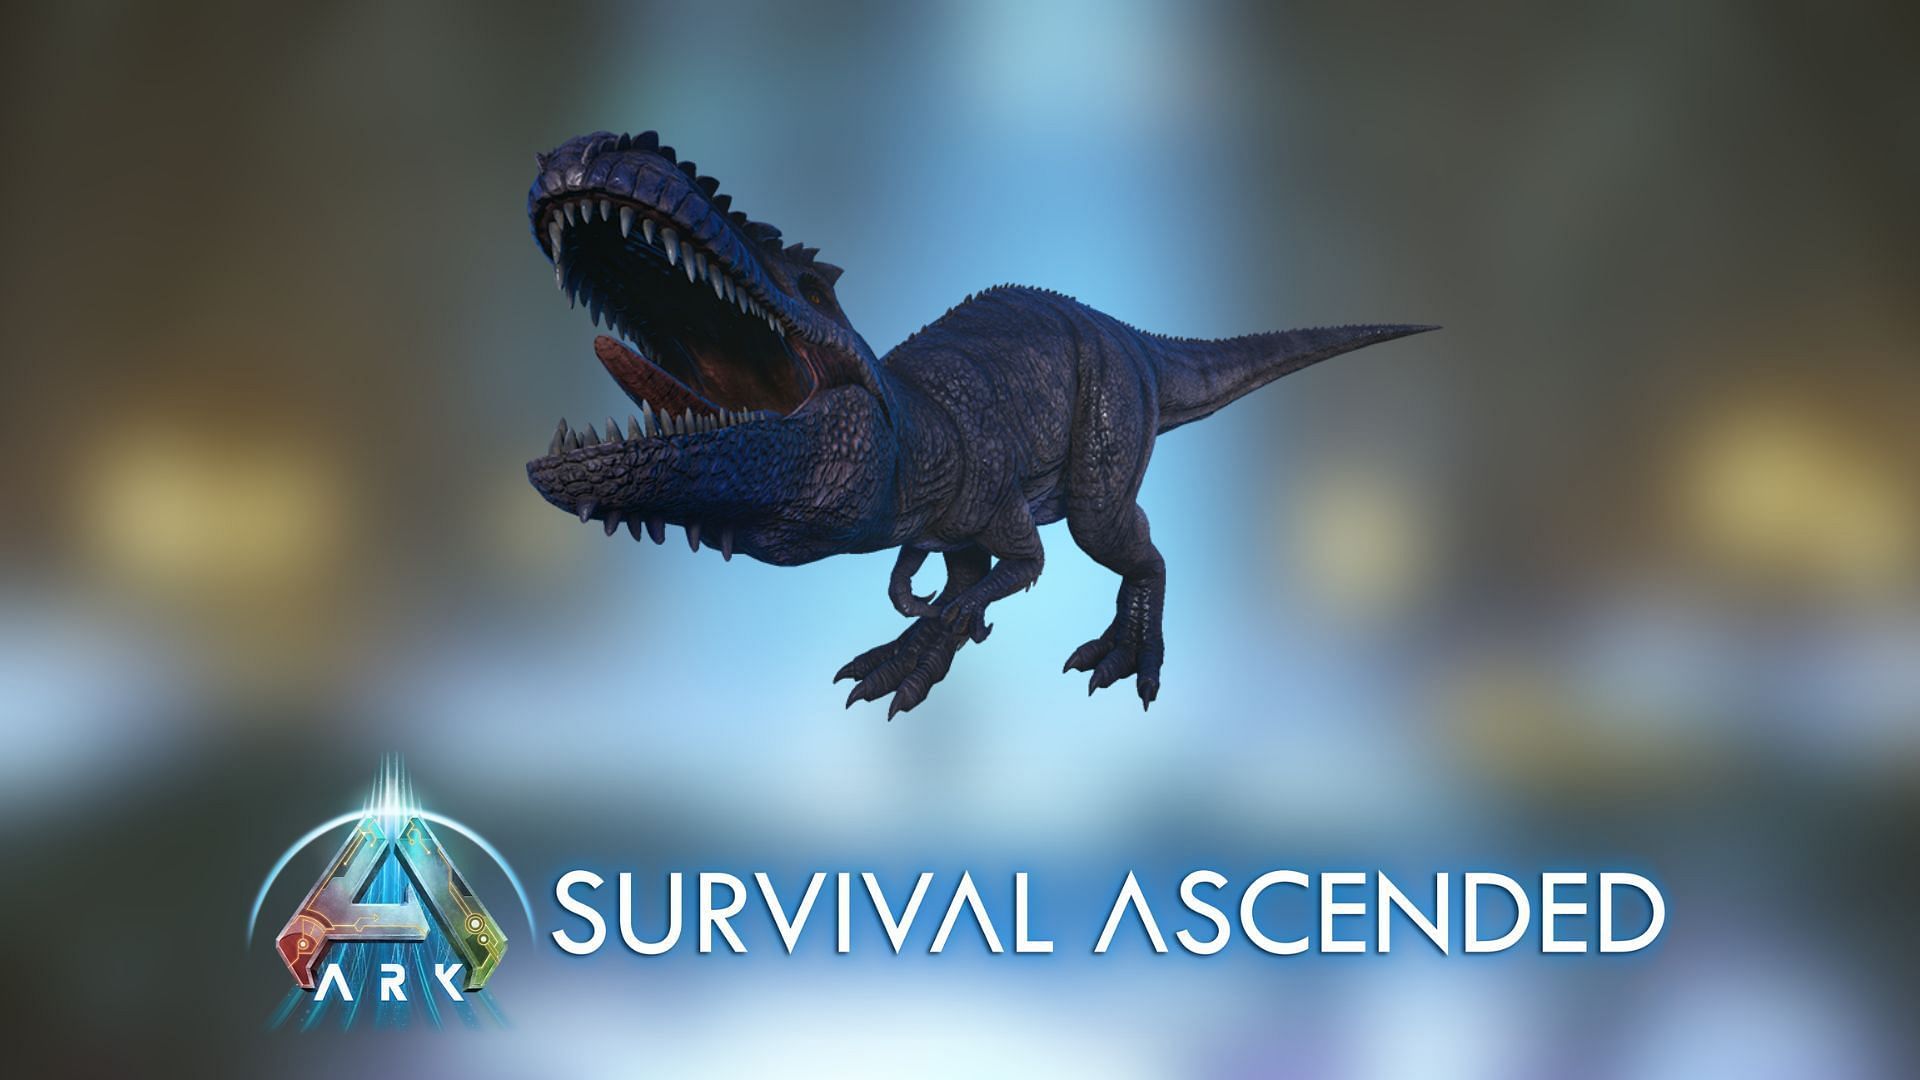 Giga is one of the largest and most tanky tames in Ark Survival Ascended. (Image via Studio Wildcard)